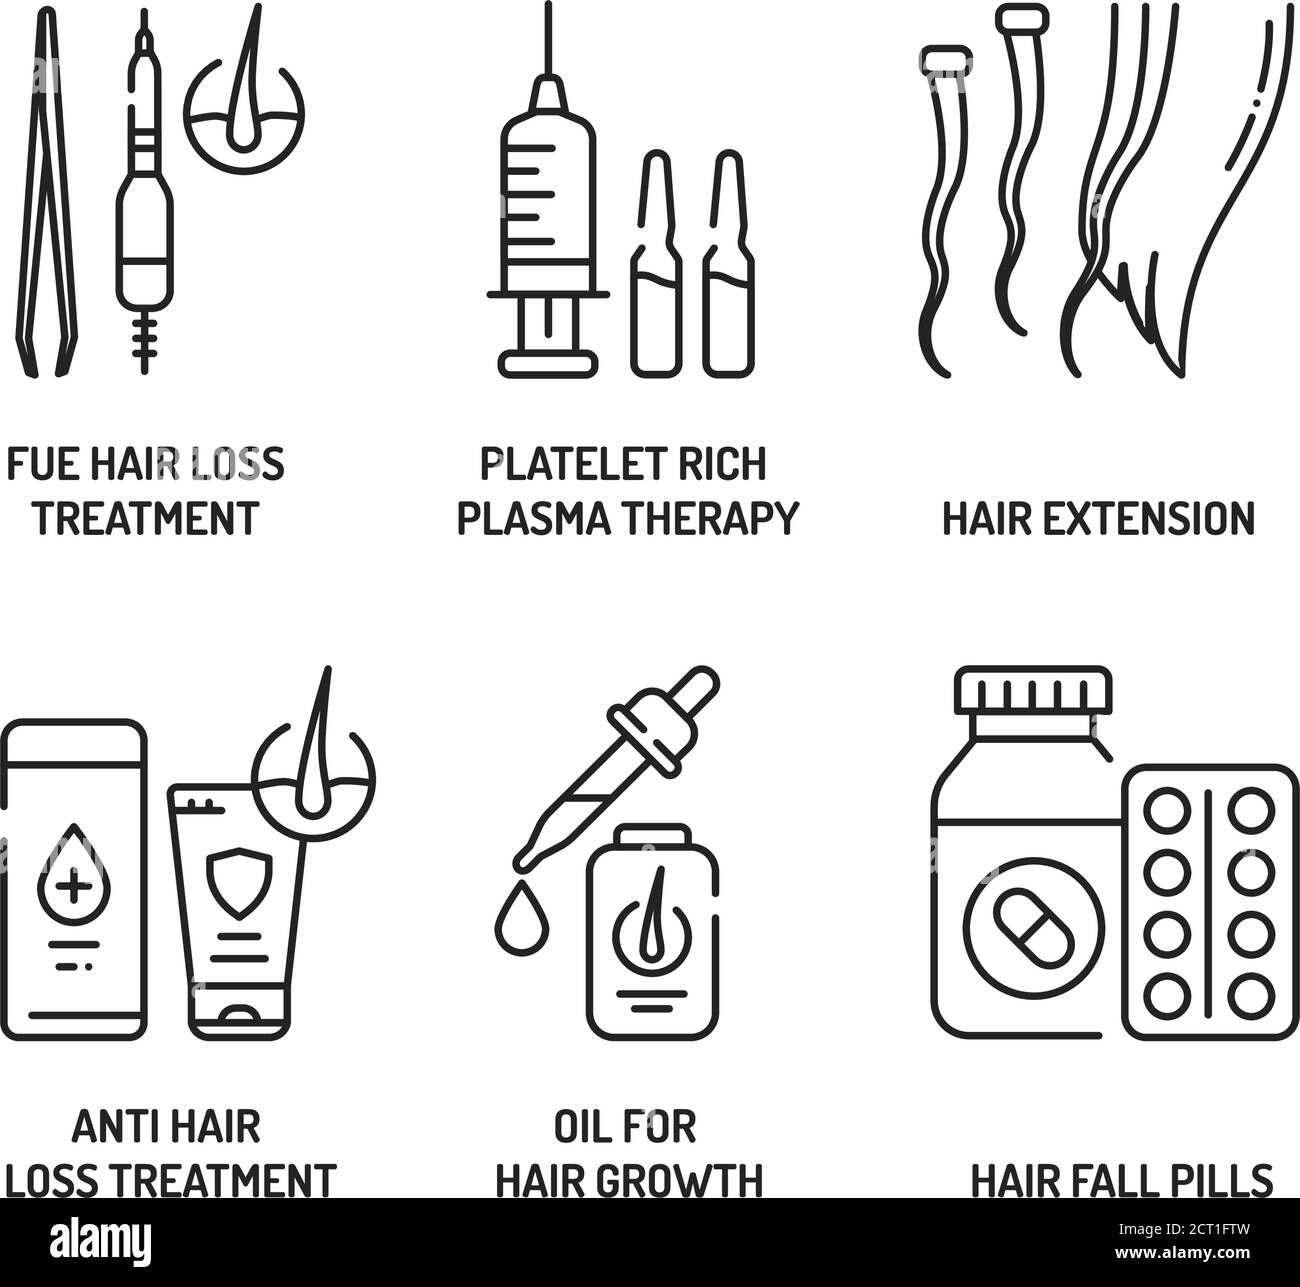 Hair treatment for alopecia black line icons set. Tools and actions that can help cure baldness. Alopecia. Pictogram for web page, mobile app, promo Stock Vector